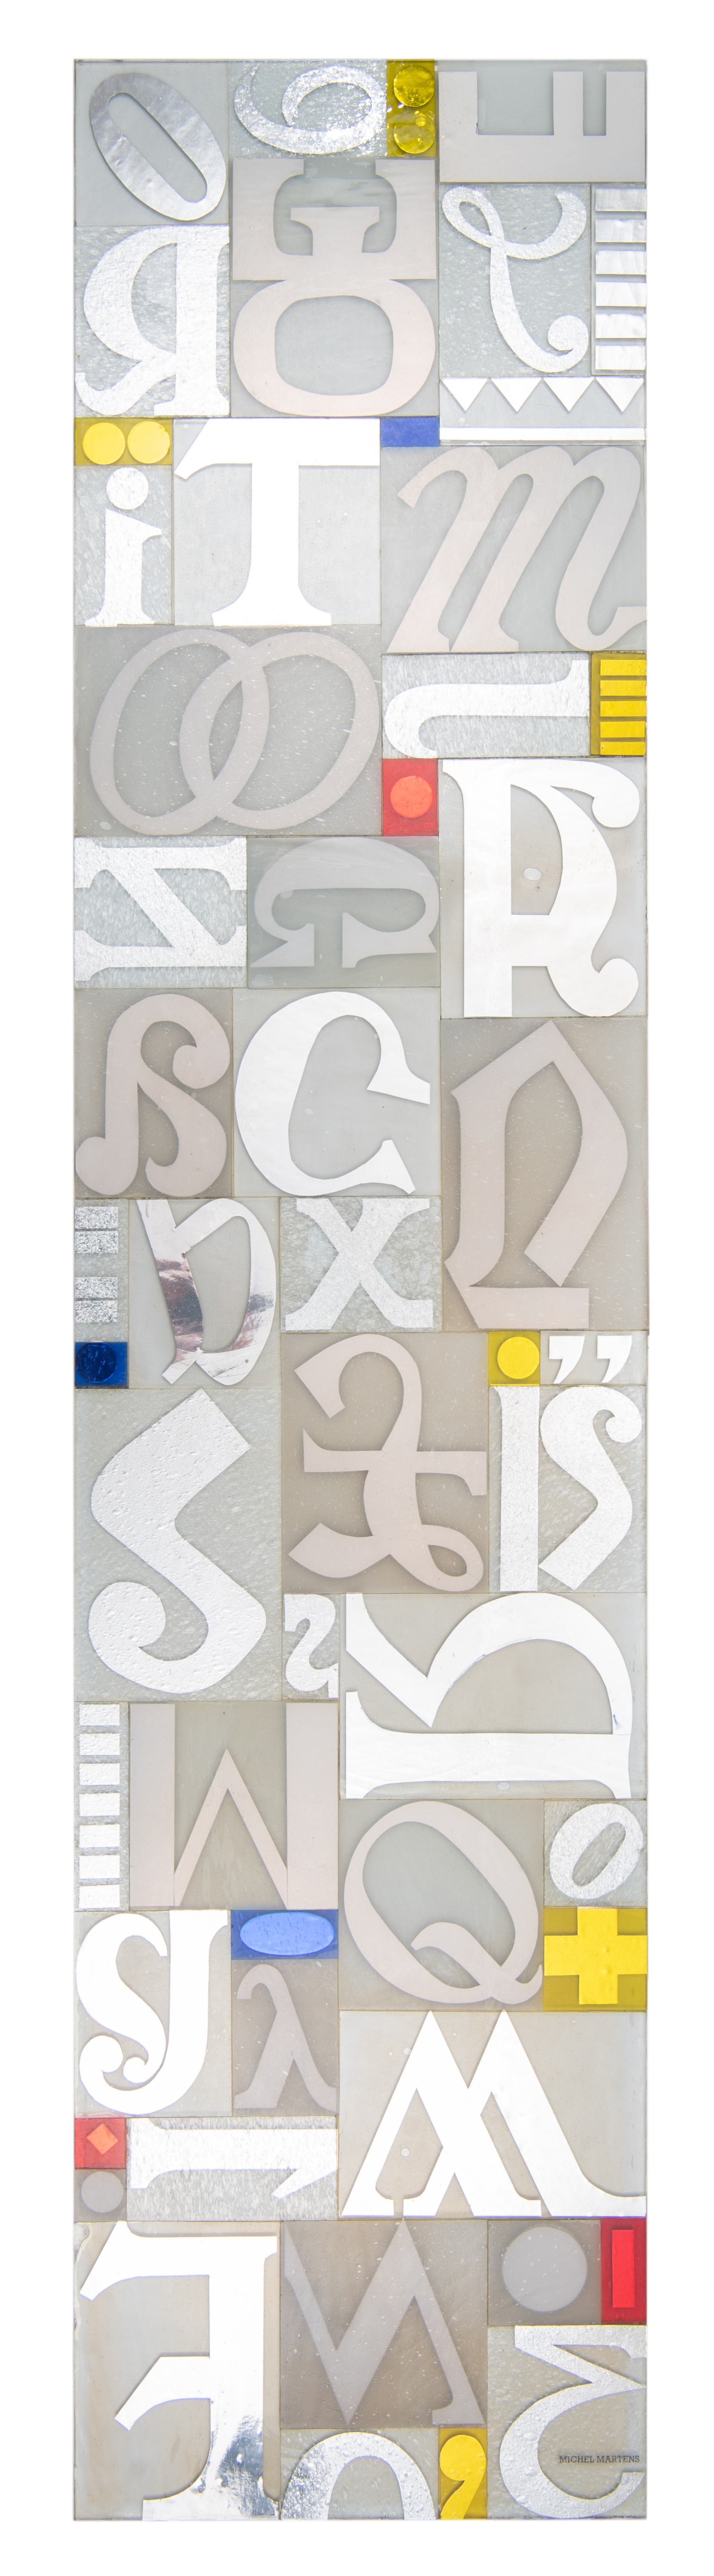 Michel Martens, a large glass sculpture with severalÿpunctuation marks, coloured, frosted and sandbl